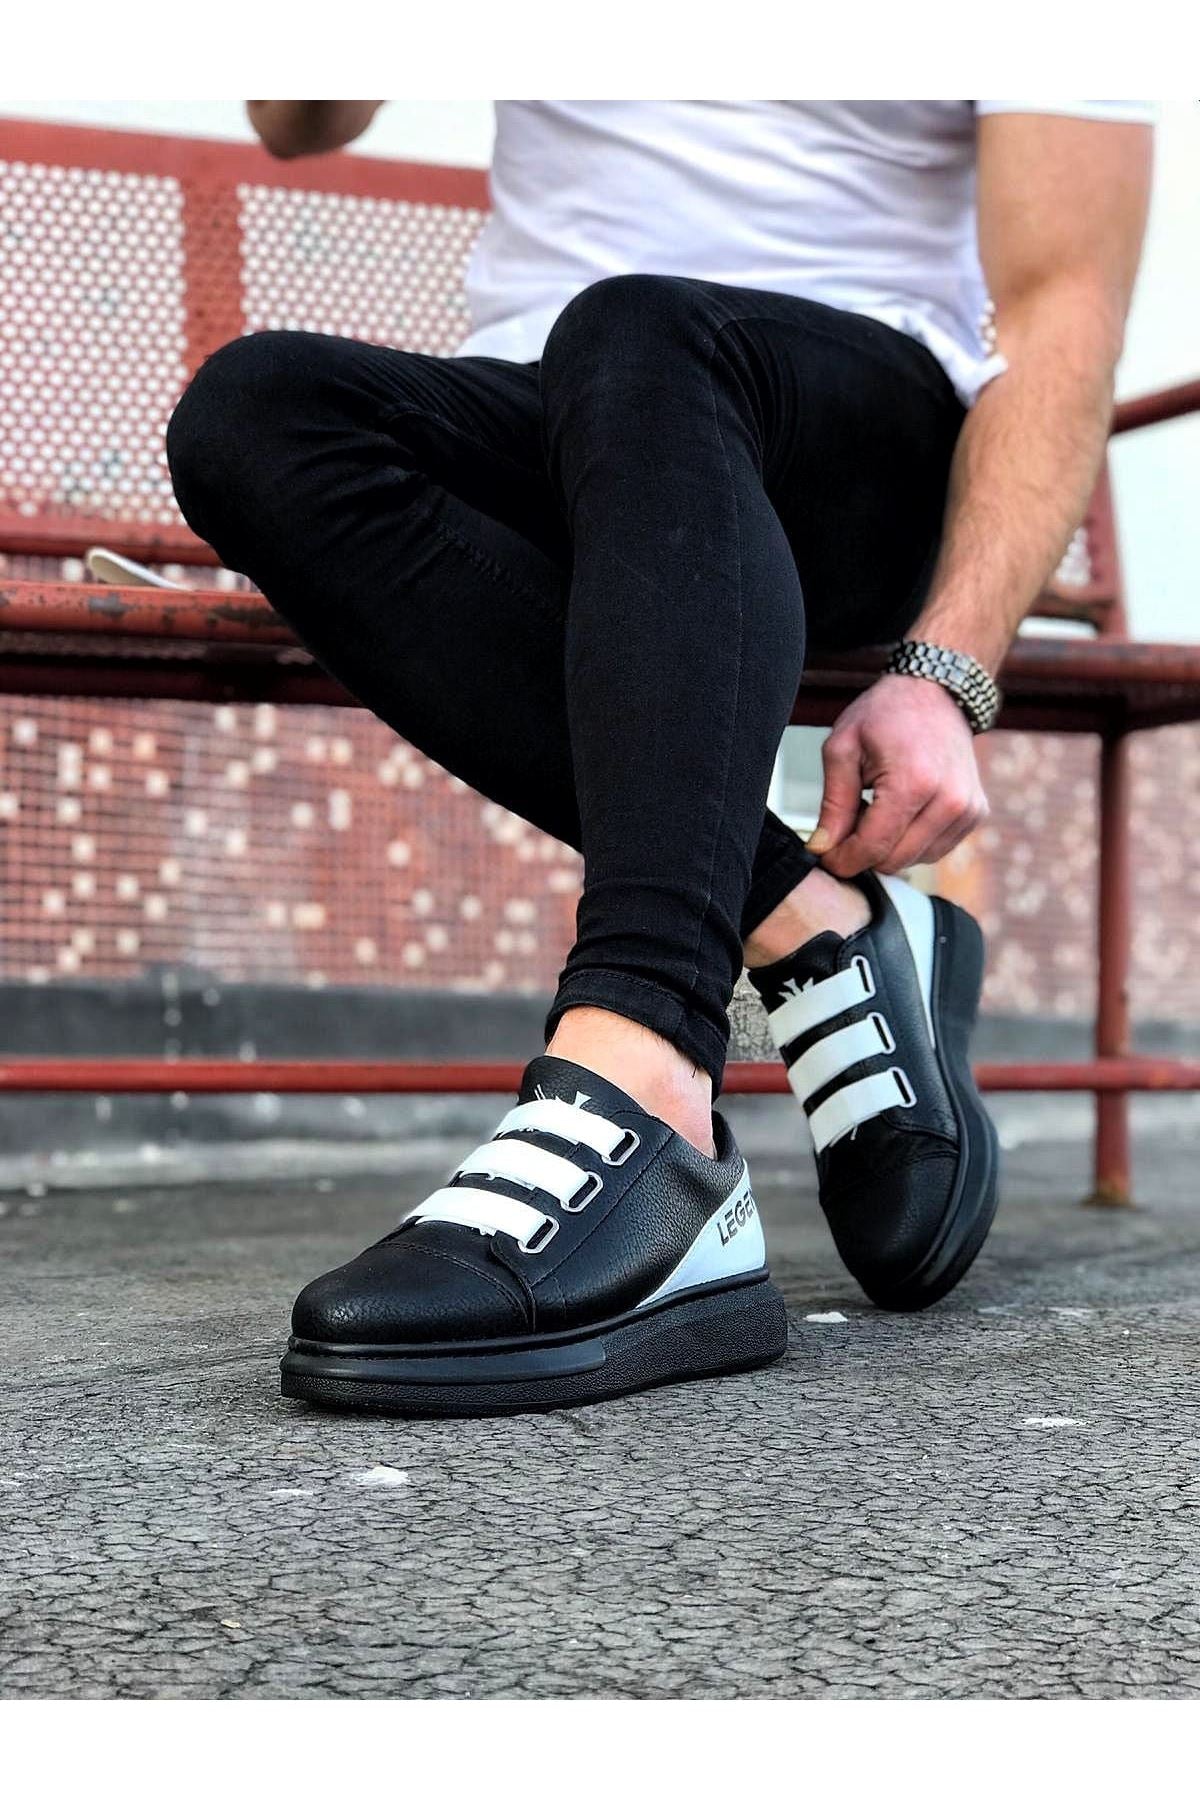 WG029 3-Stripes Legend Charcoal White Thick Sole Casual Men's Shoes sneakers - STREETMODE ™